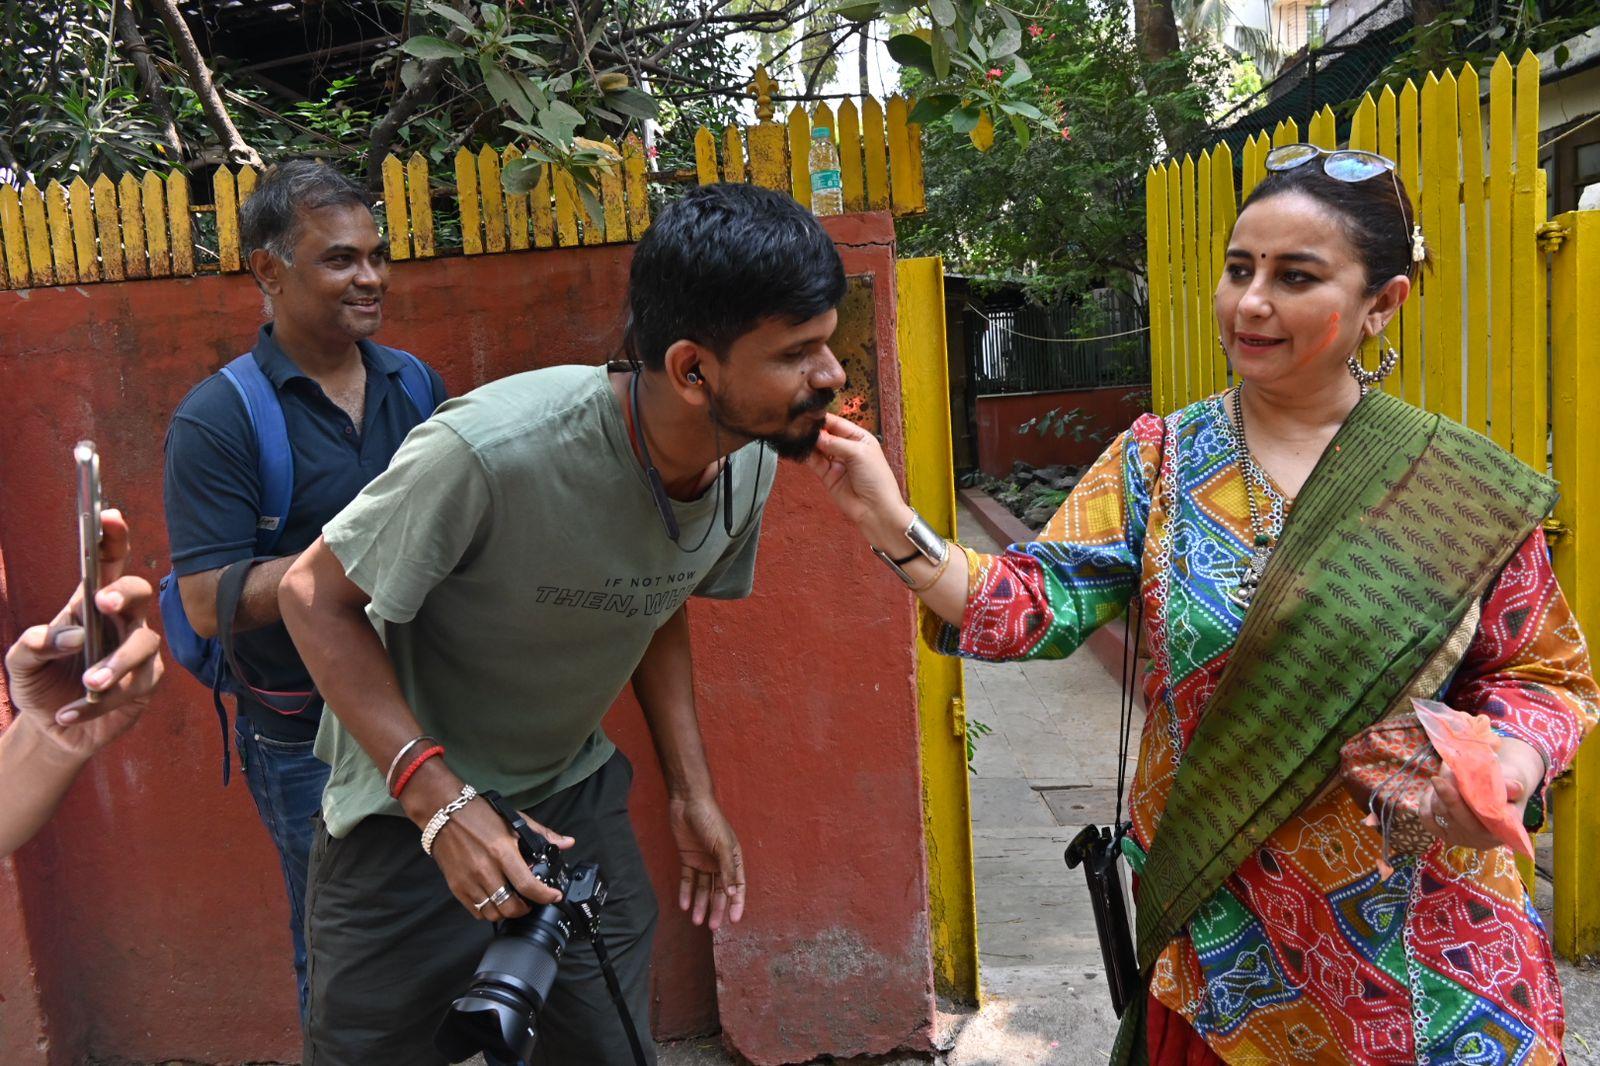 Before going inside, Divya put colour on the paparazzi who came to capture the celebration